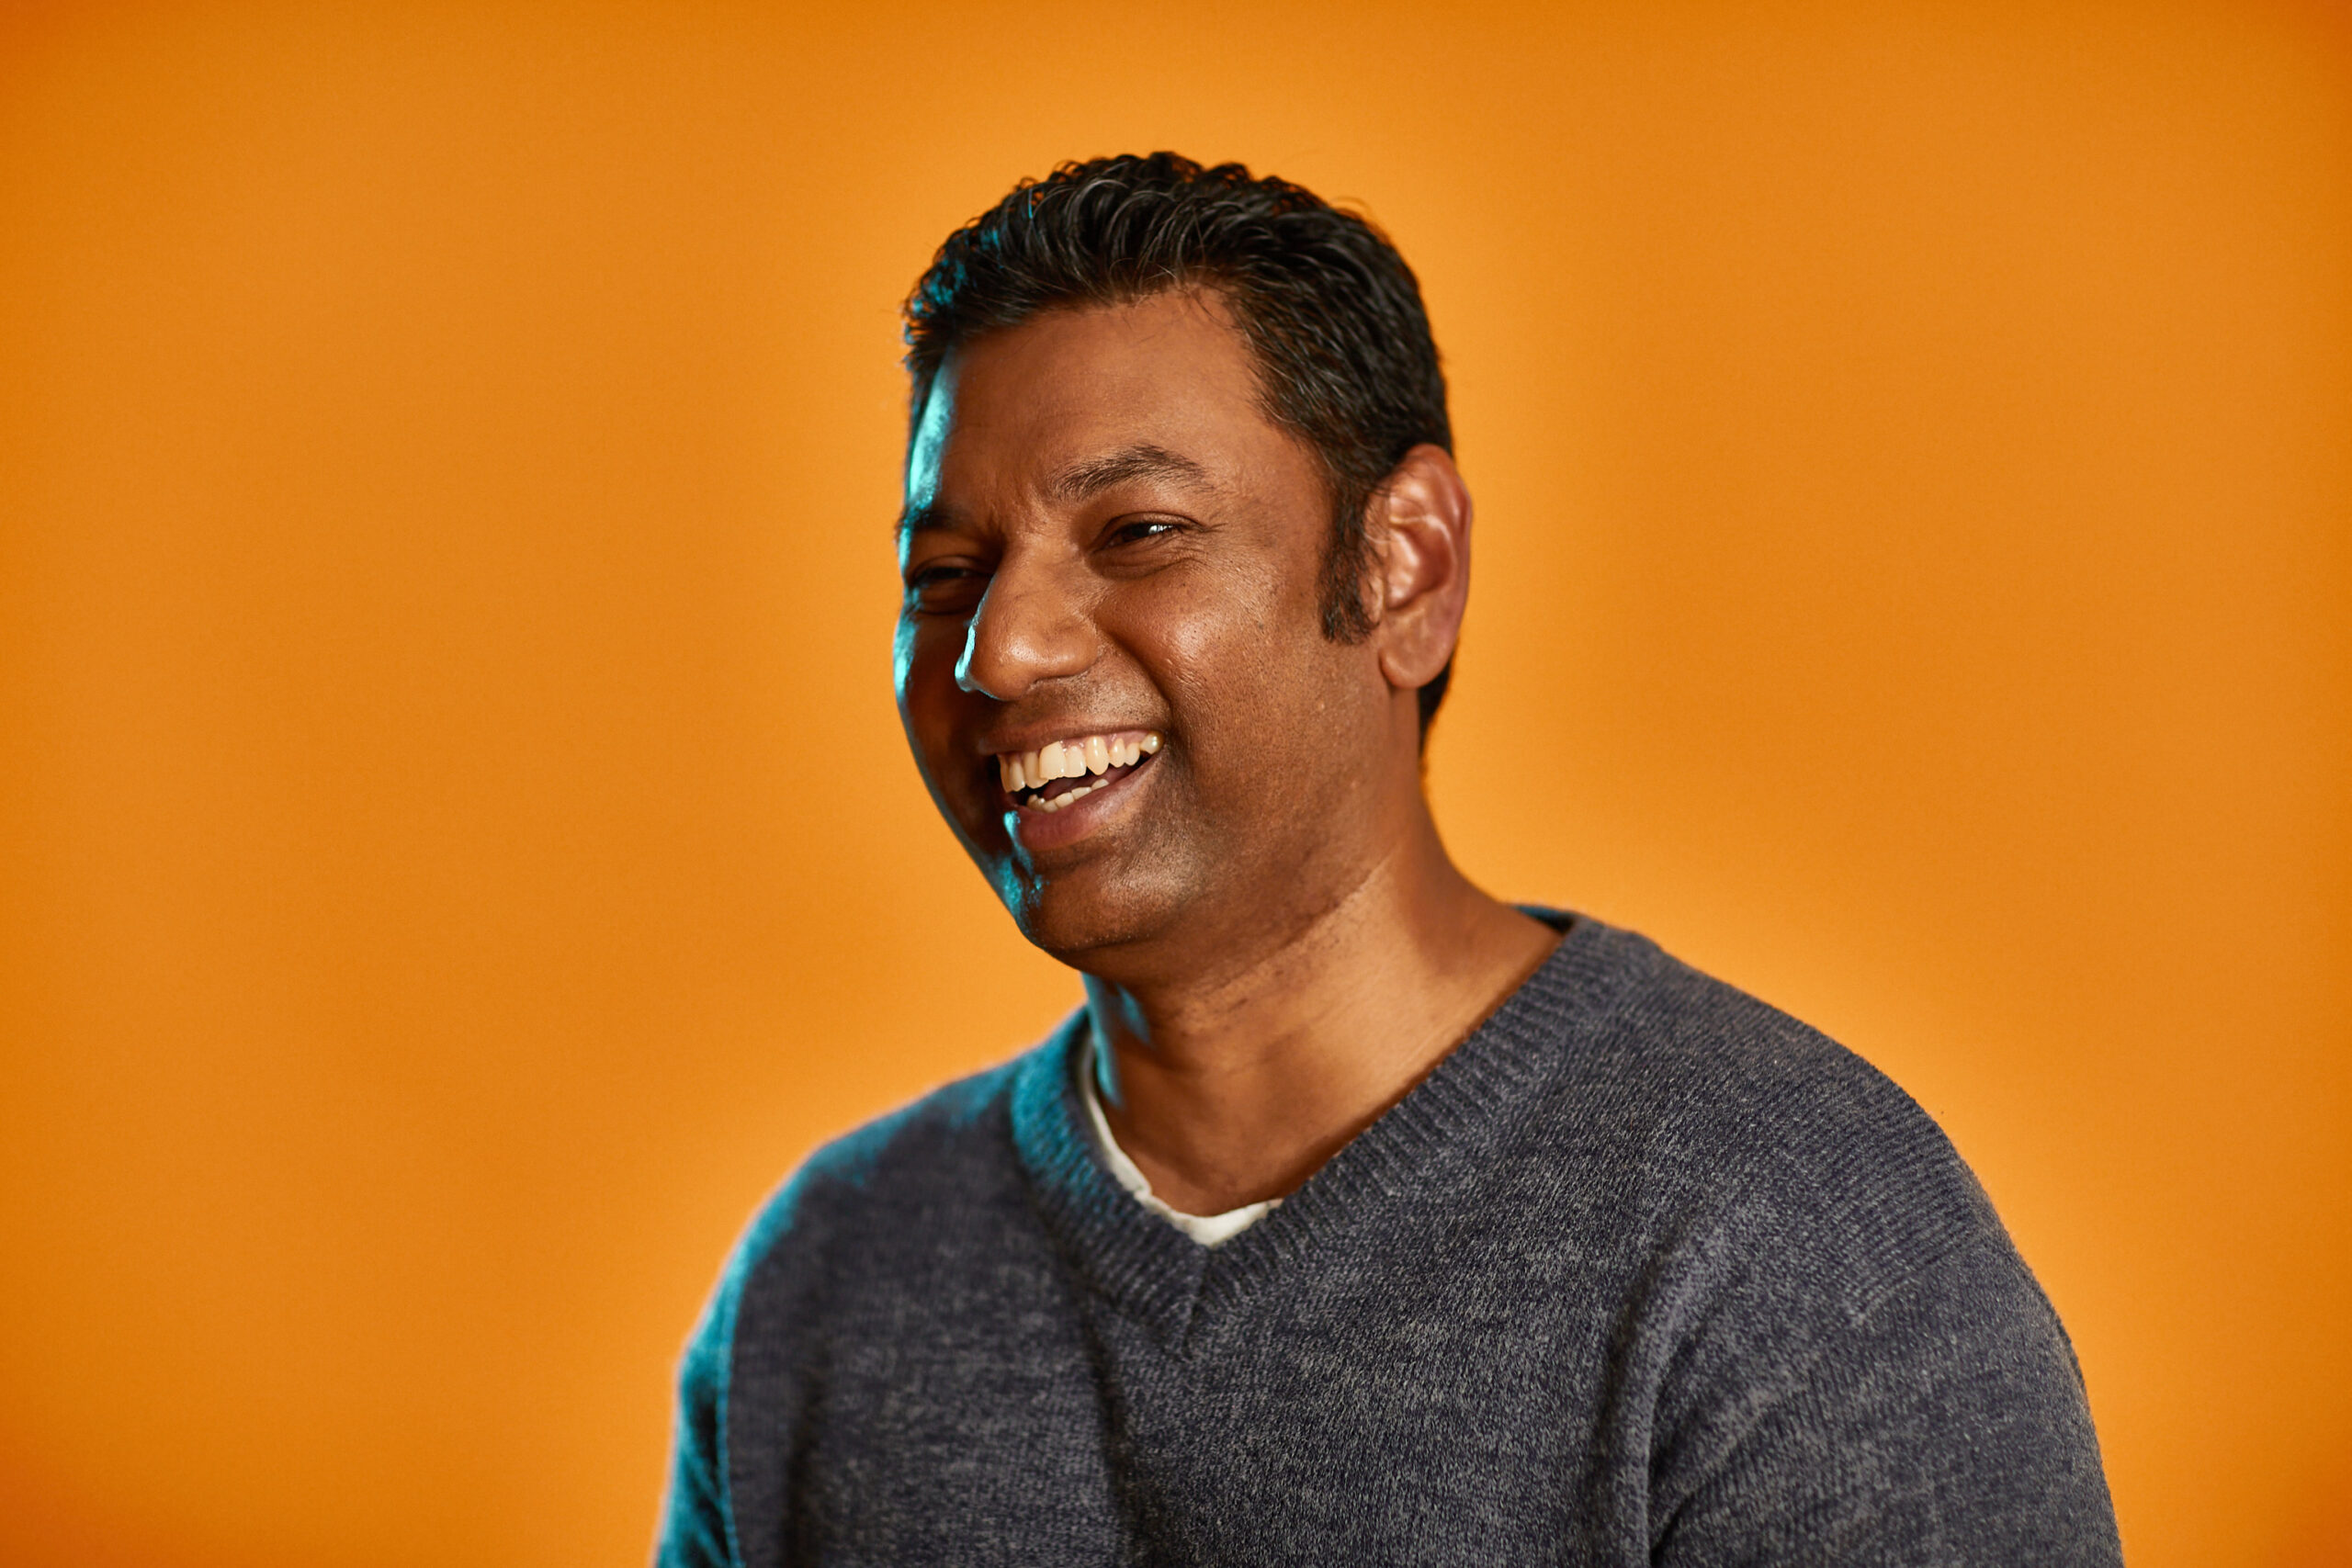 Man smiling sitting in front of an orange background